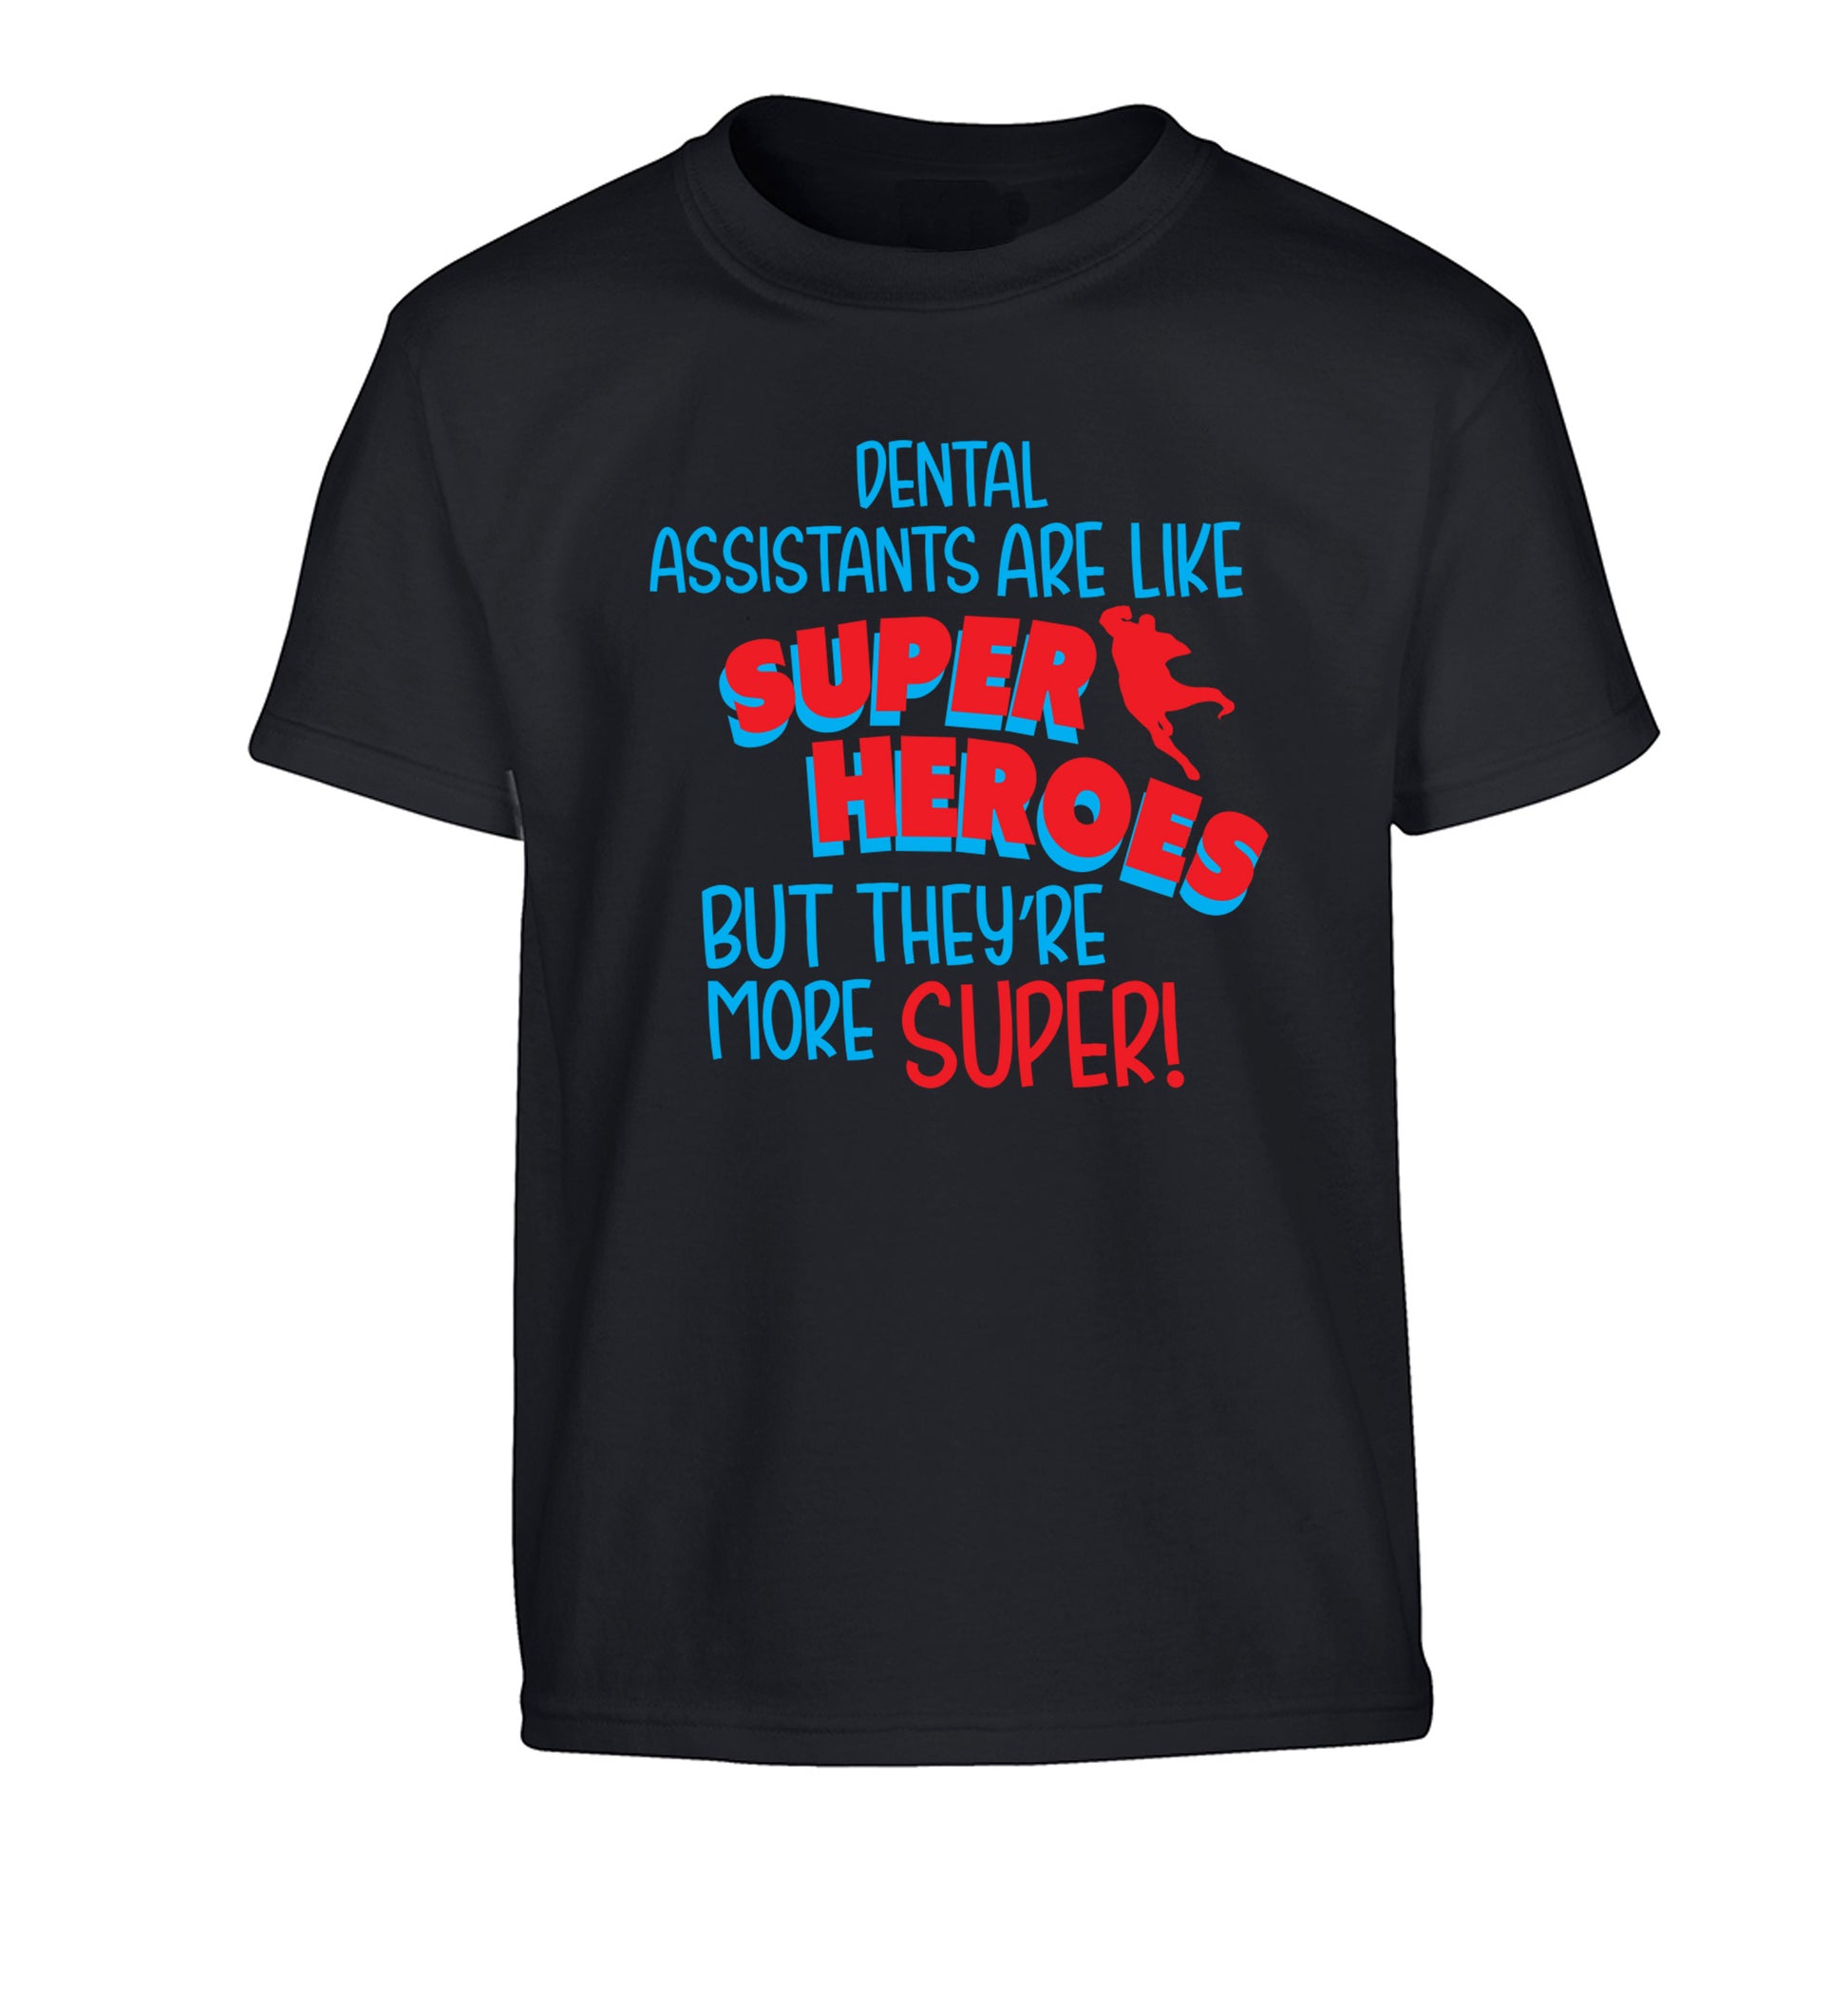 Dental Assistants are like superheros but they're more super Children's black Tshirt 12-13 Years